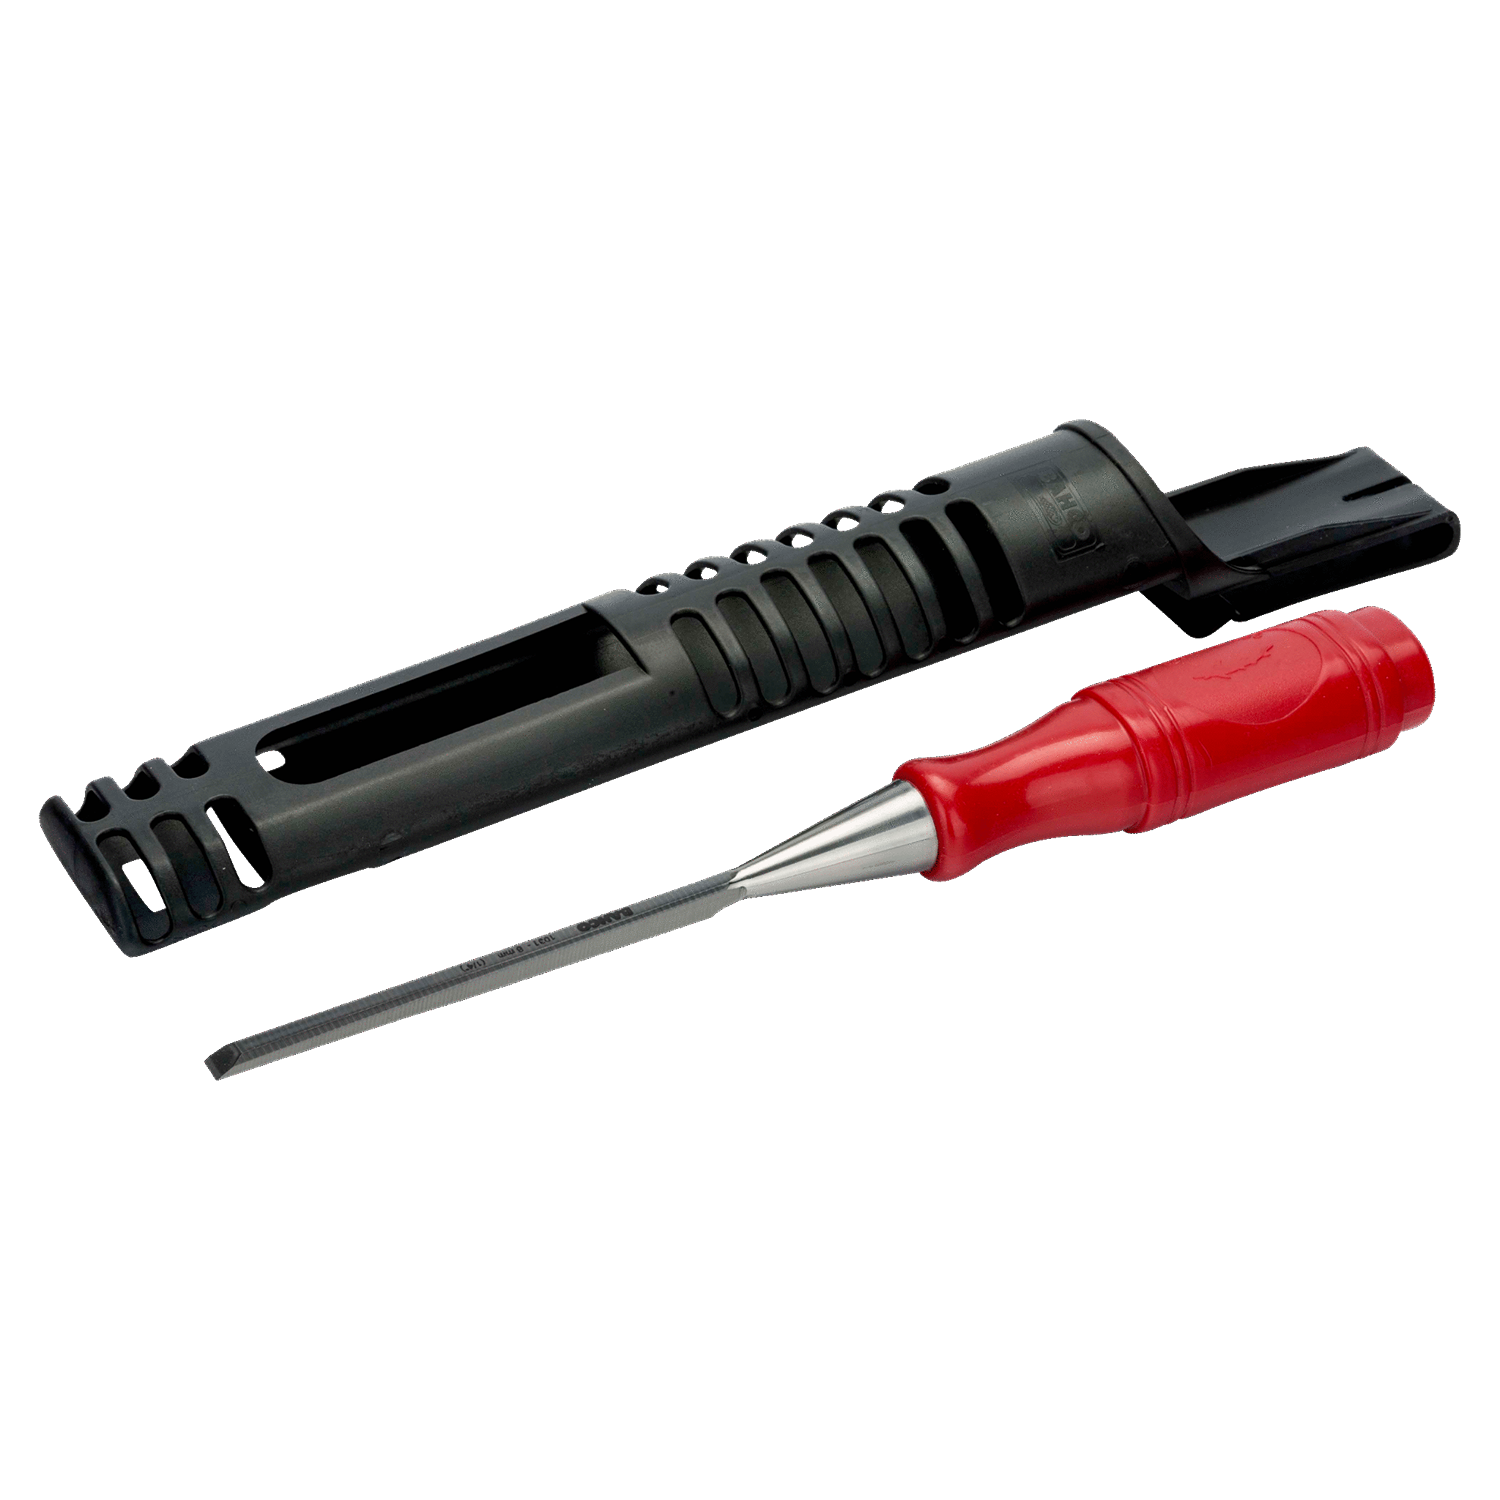 BAHCO 1031 Woodworking Chisel with Red Polypropylene Handle - Premium Woodworking Chisel from BAHCO - Shop now at Yew Aik.